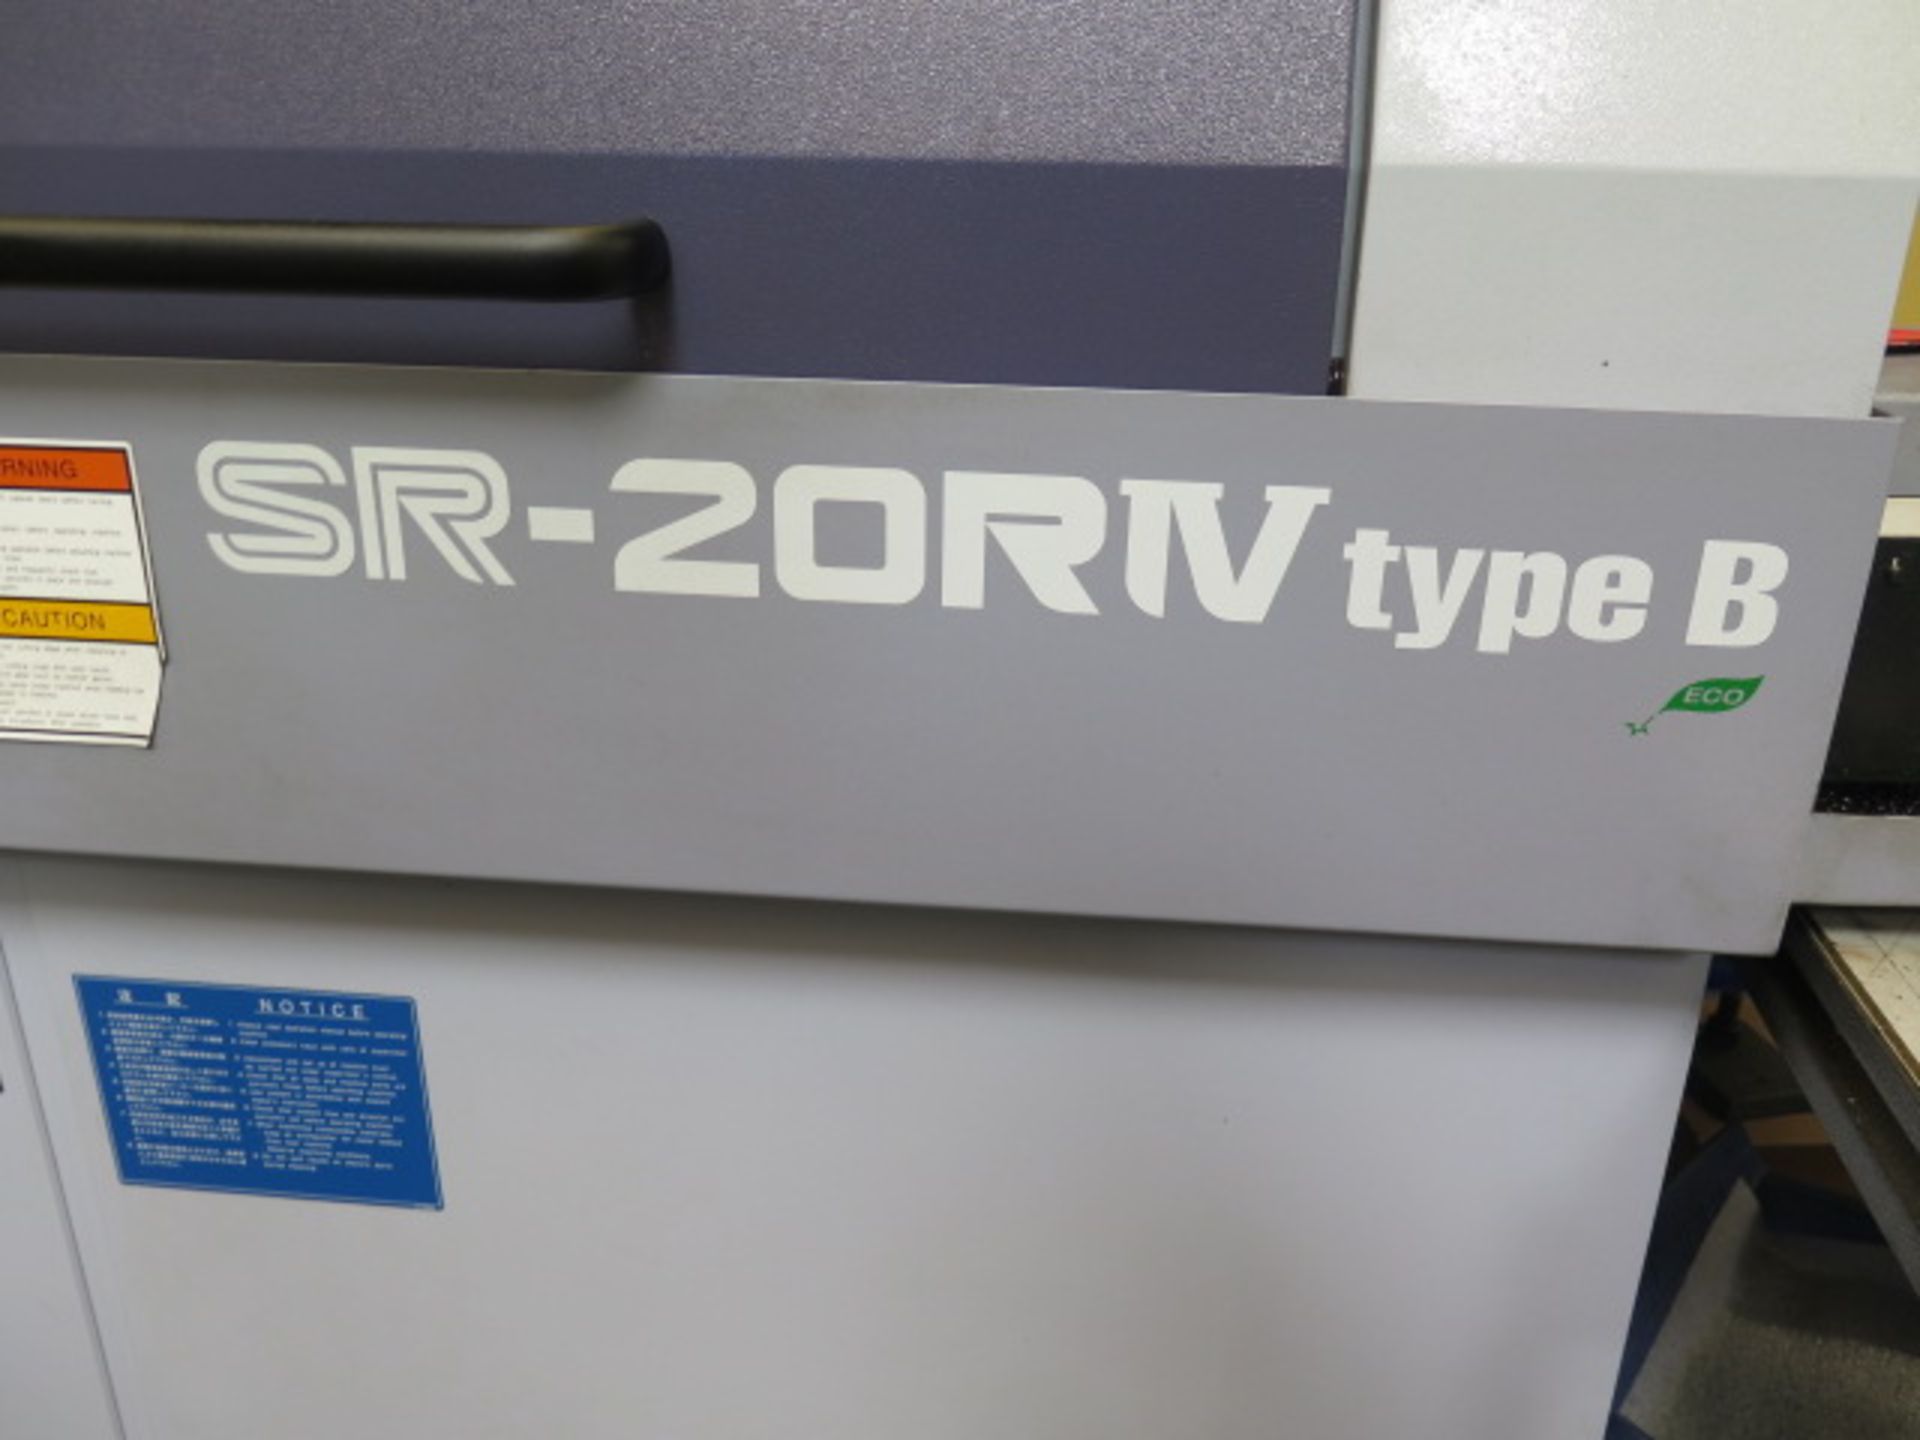 2018 Star SR-20R IV Type B 20mm CNC Screw Machine s/n 0609(056) w/ Fanuc 31i-Model B5, SOLD AS IS - Image 5 of 16